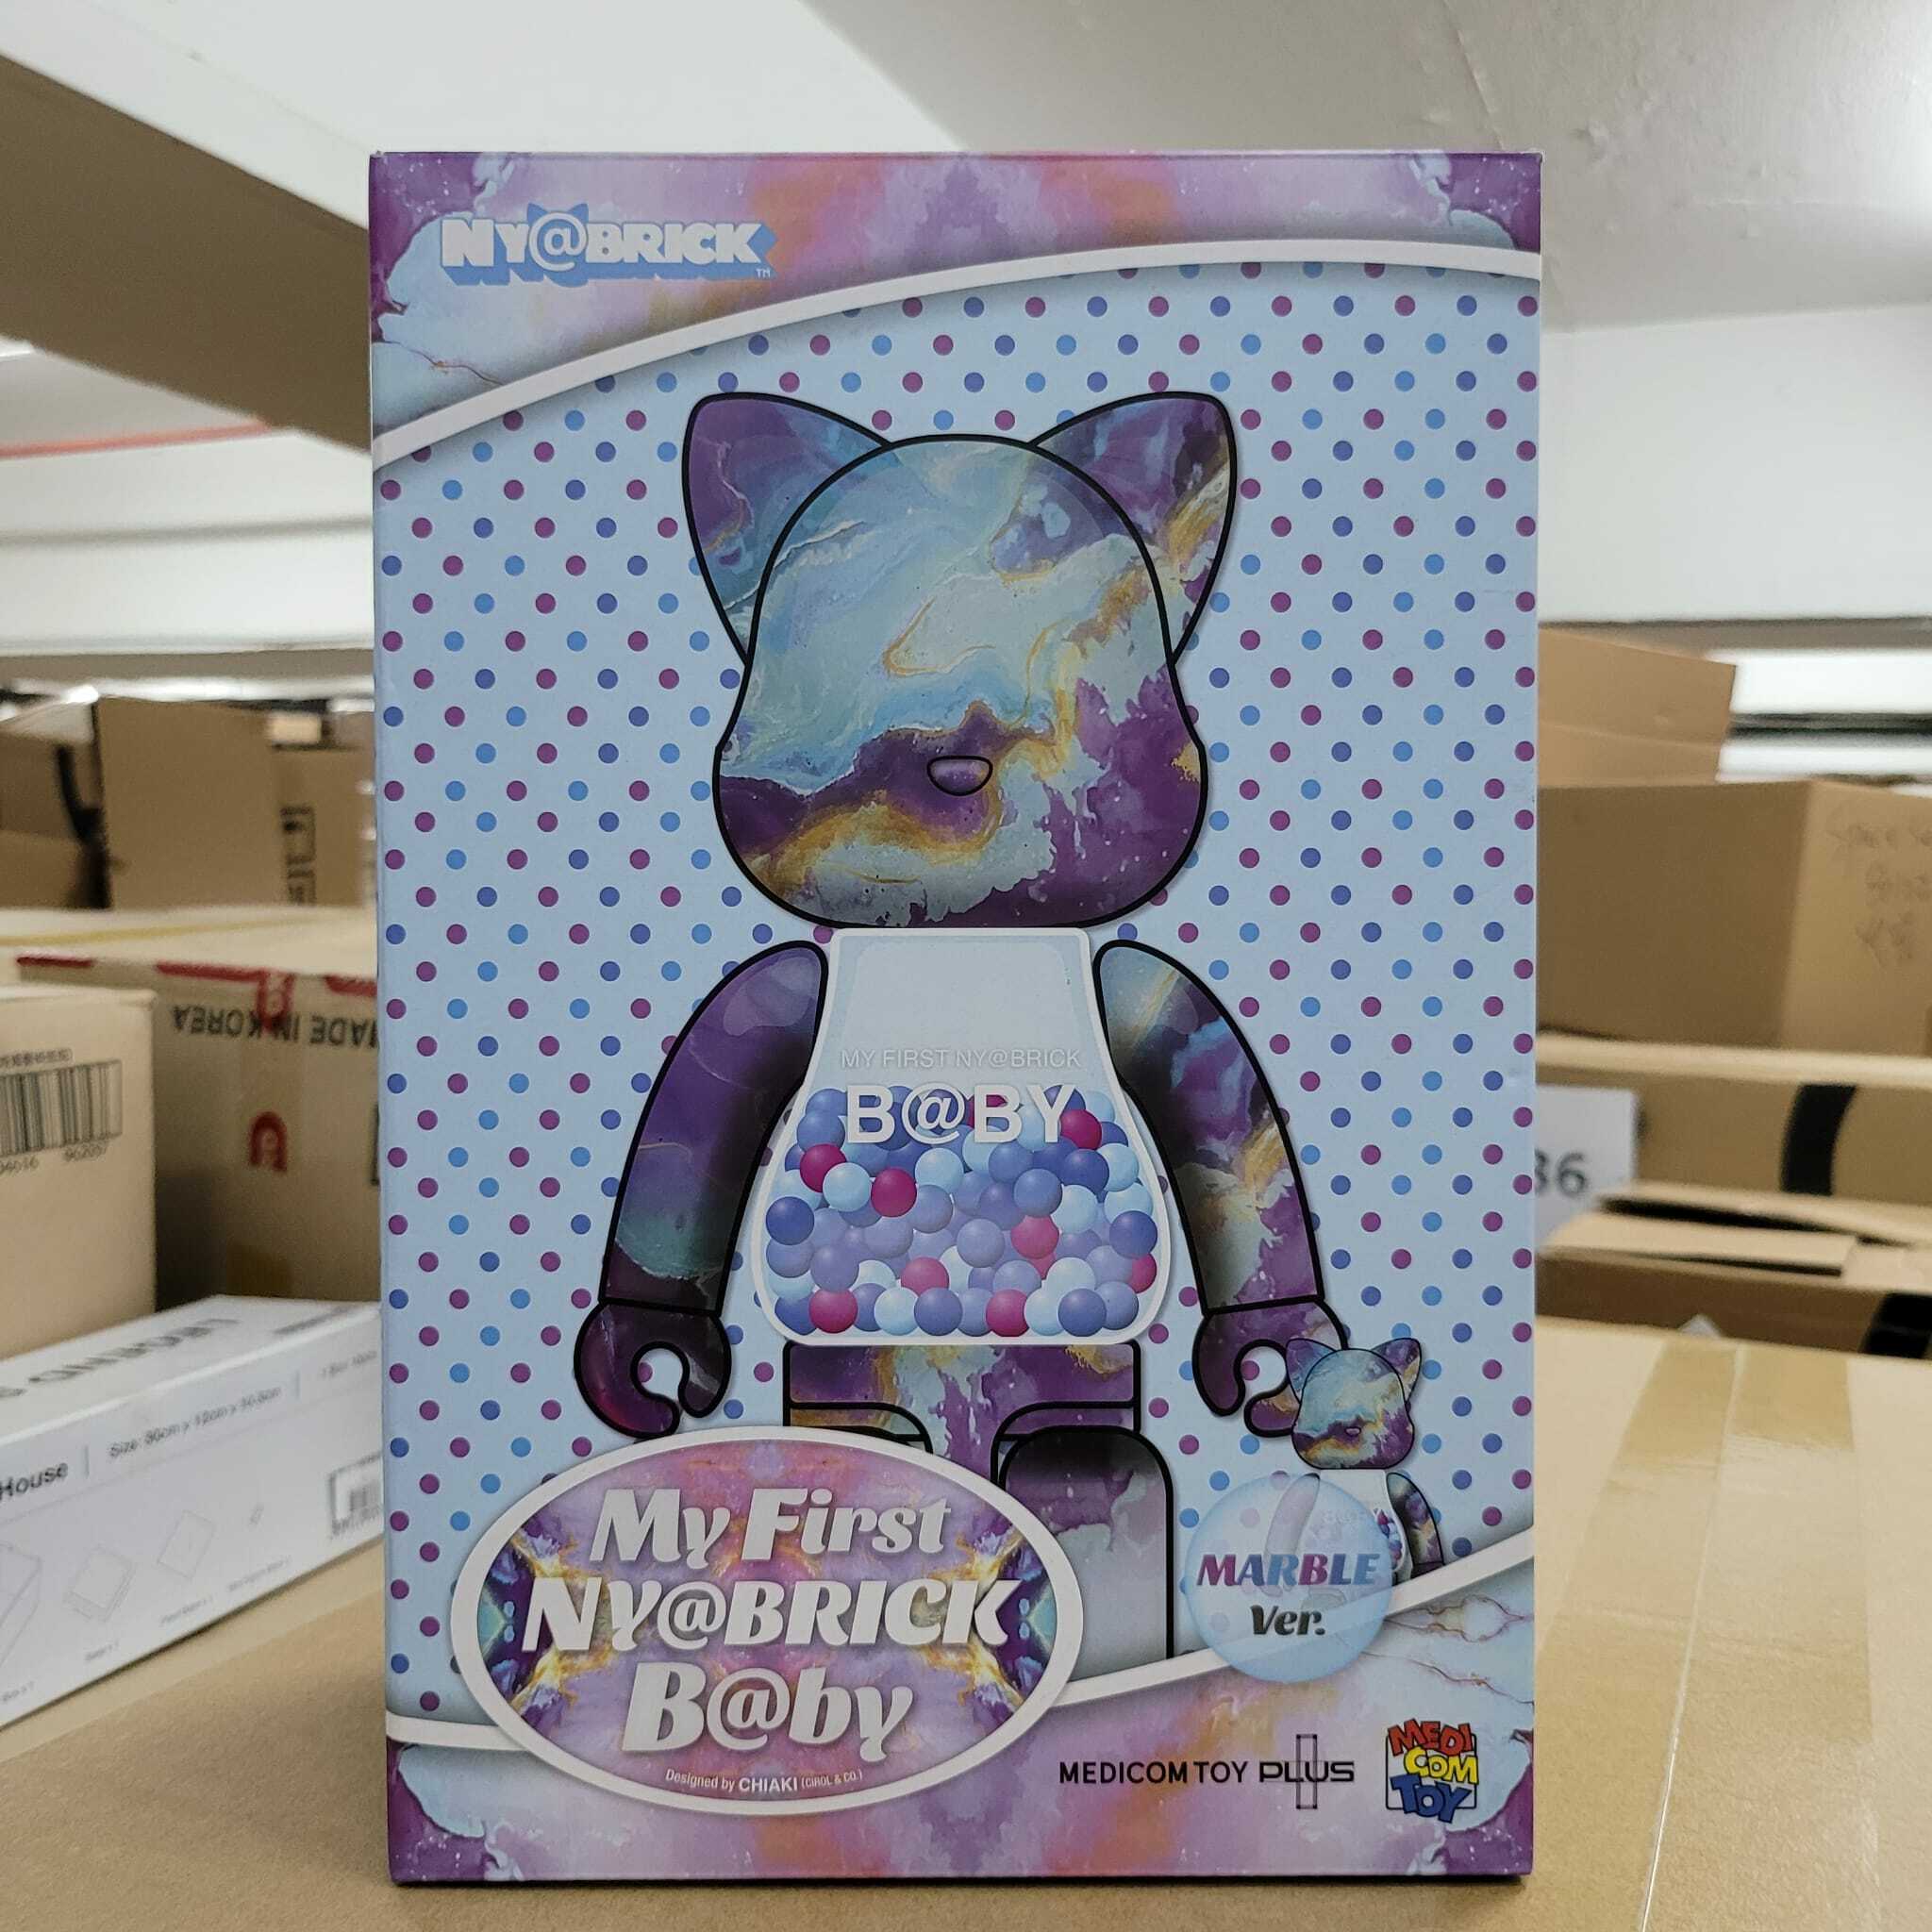 BE@RBRICK MY FIRST NY@RBRICK B@BY MARBLE Ver. 100%&400%